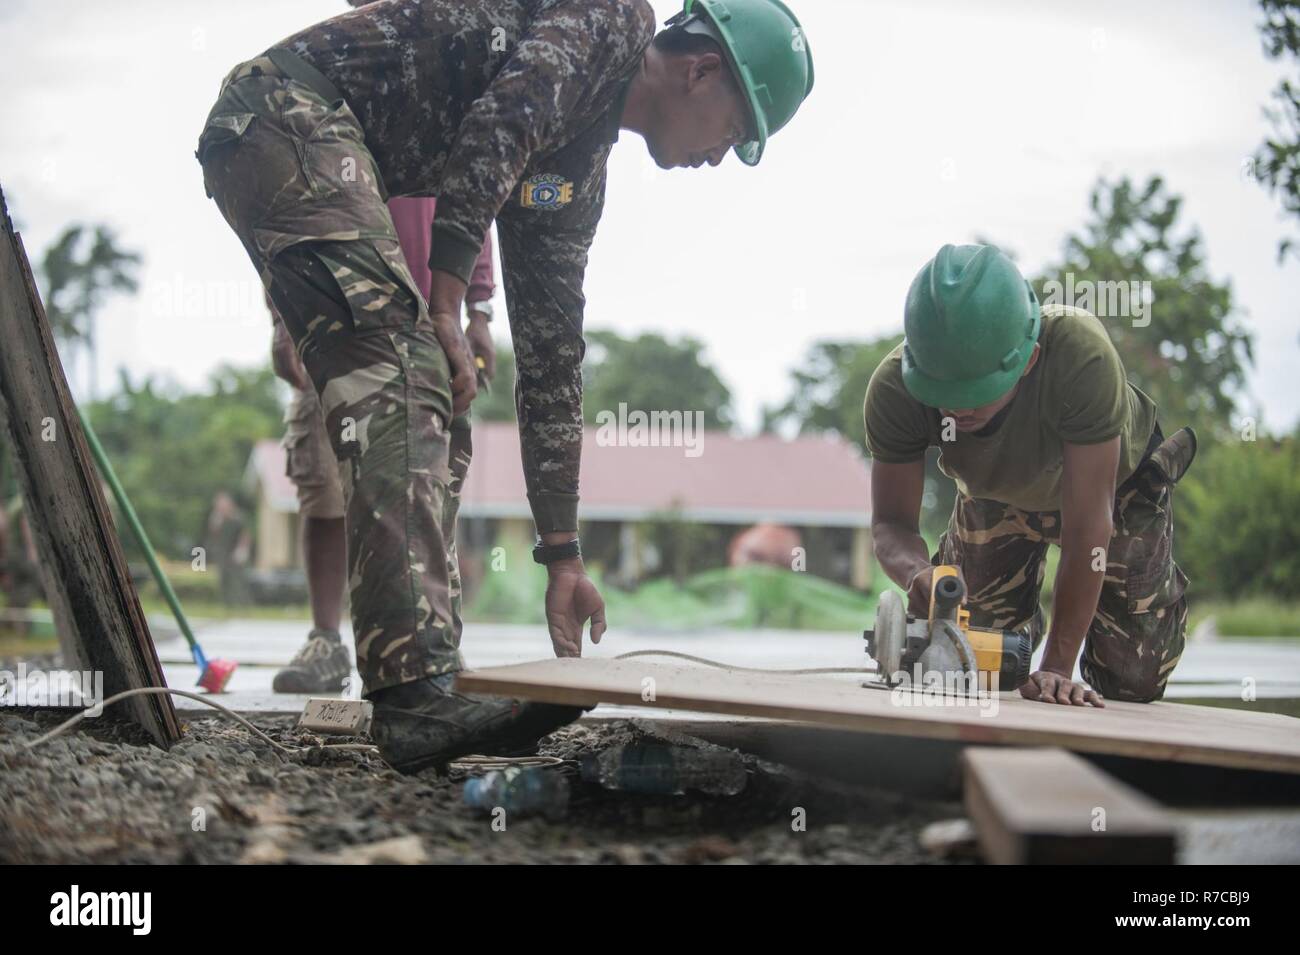 Philippine Army Cpl. Jerwin Vic Jaballa, left, and Pfc. Joel Perez cut lumber during an engineering civic assistance project in support of Balikatan 2017 in Guiuan, Eastern Samar, May 11, 2017. Armed Forces of the Philippines and U.S. military engineers worked together to build new classrooms for students at Surok Elementary School. Balikatan is an annual U.S.-Philippine bilateral military exercise focused on a variety of missions, including humanitarian assistance and disaster relief, counterterrorism, and other combined military operations. Stock Photo